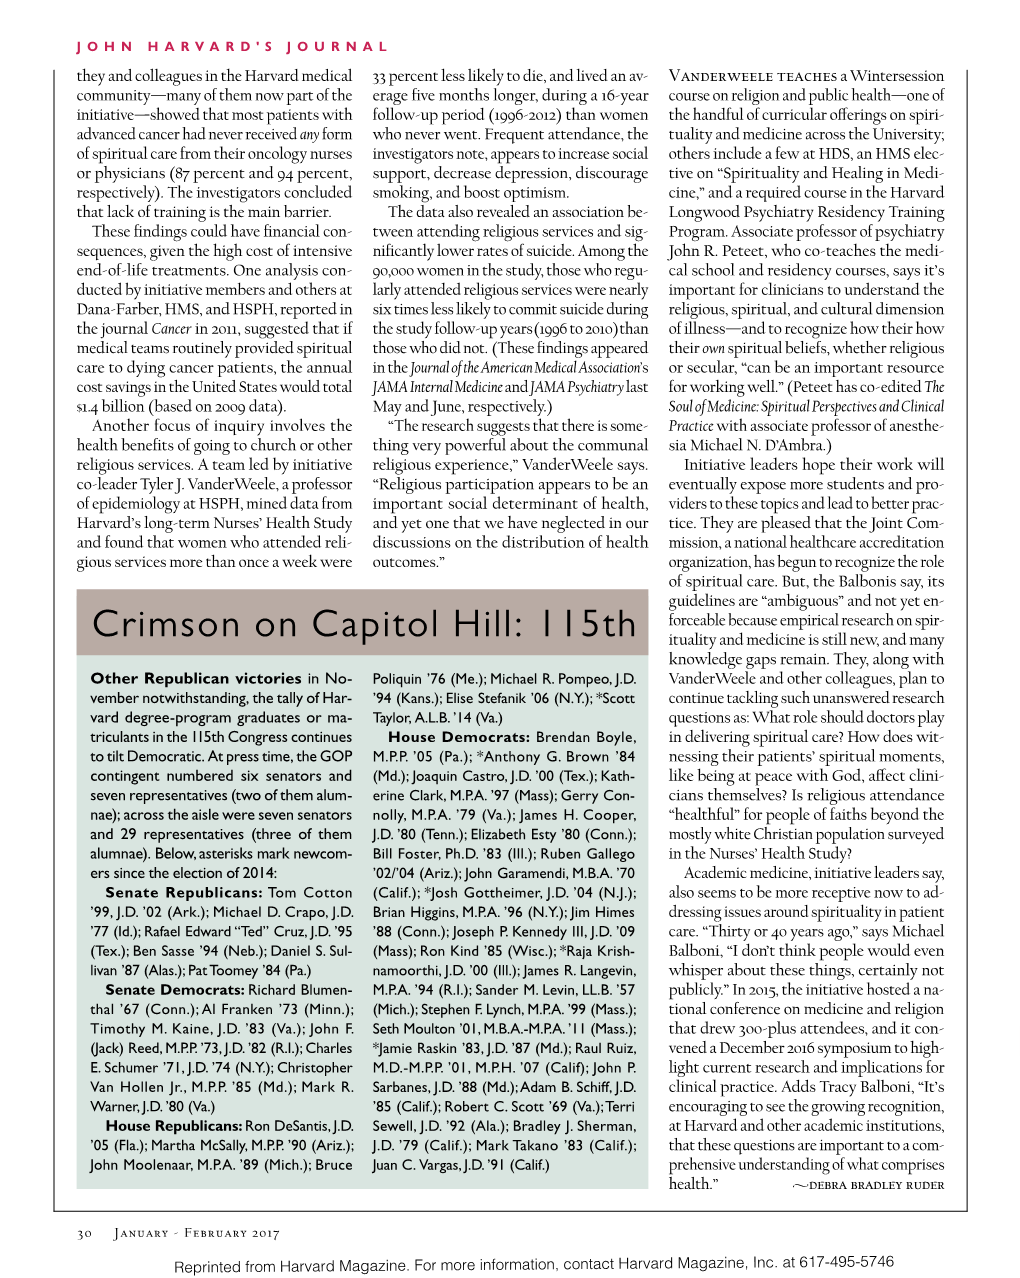 Crimson on Capitol Hill: 115Th Ituality and Medicine Is Still New, and Many Knowledge Gaps Remain